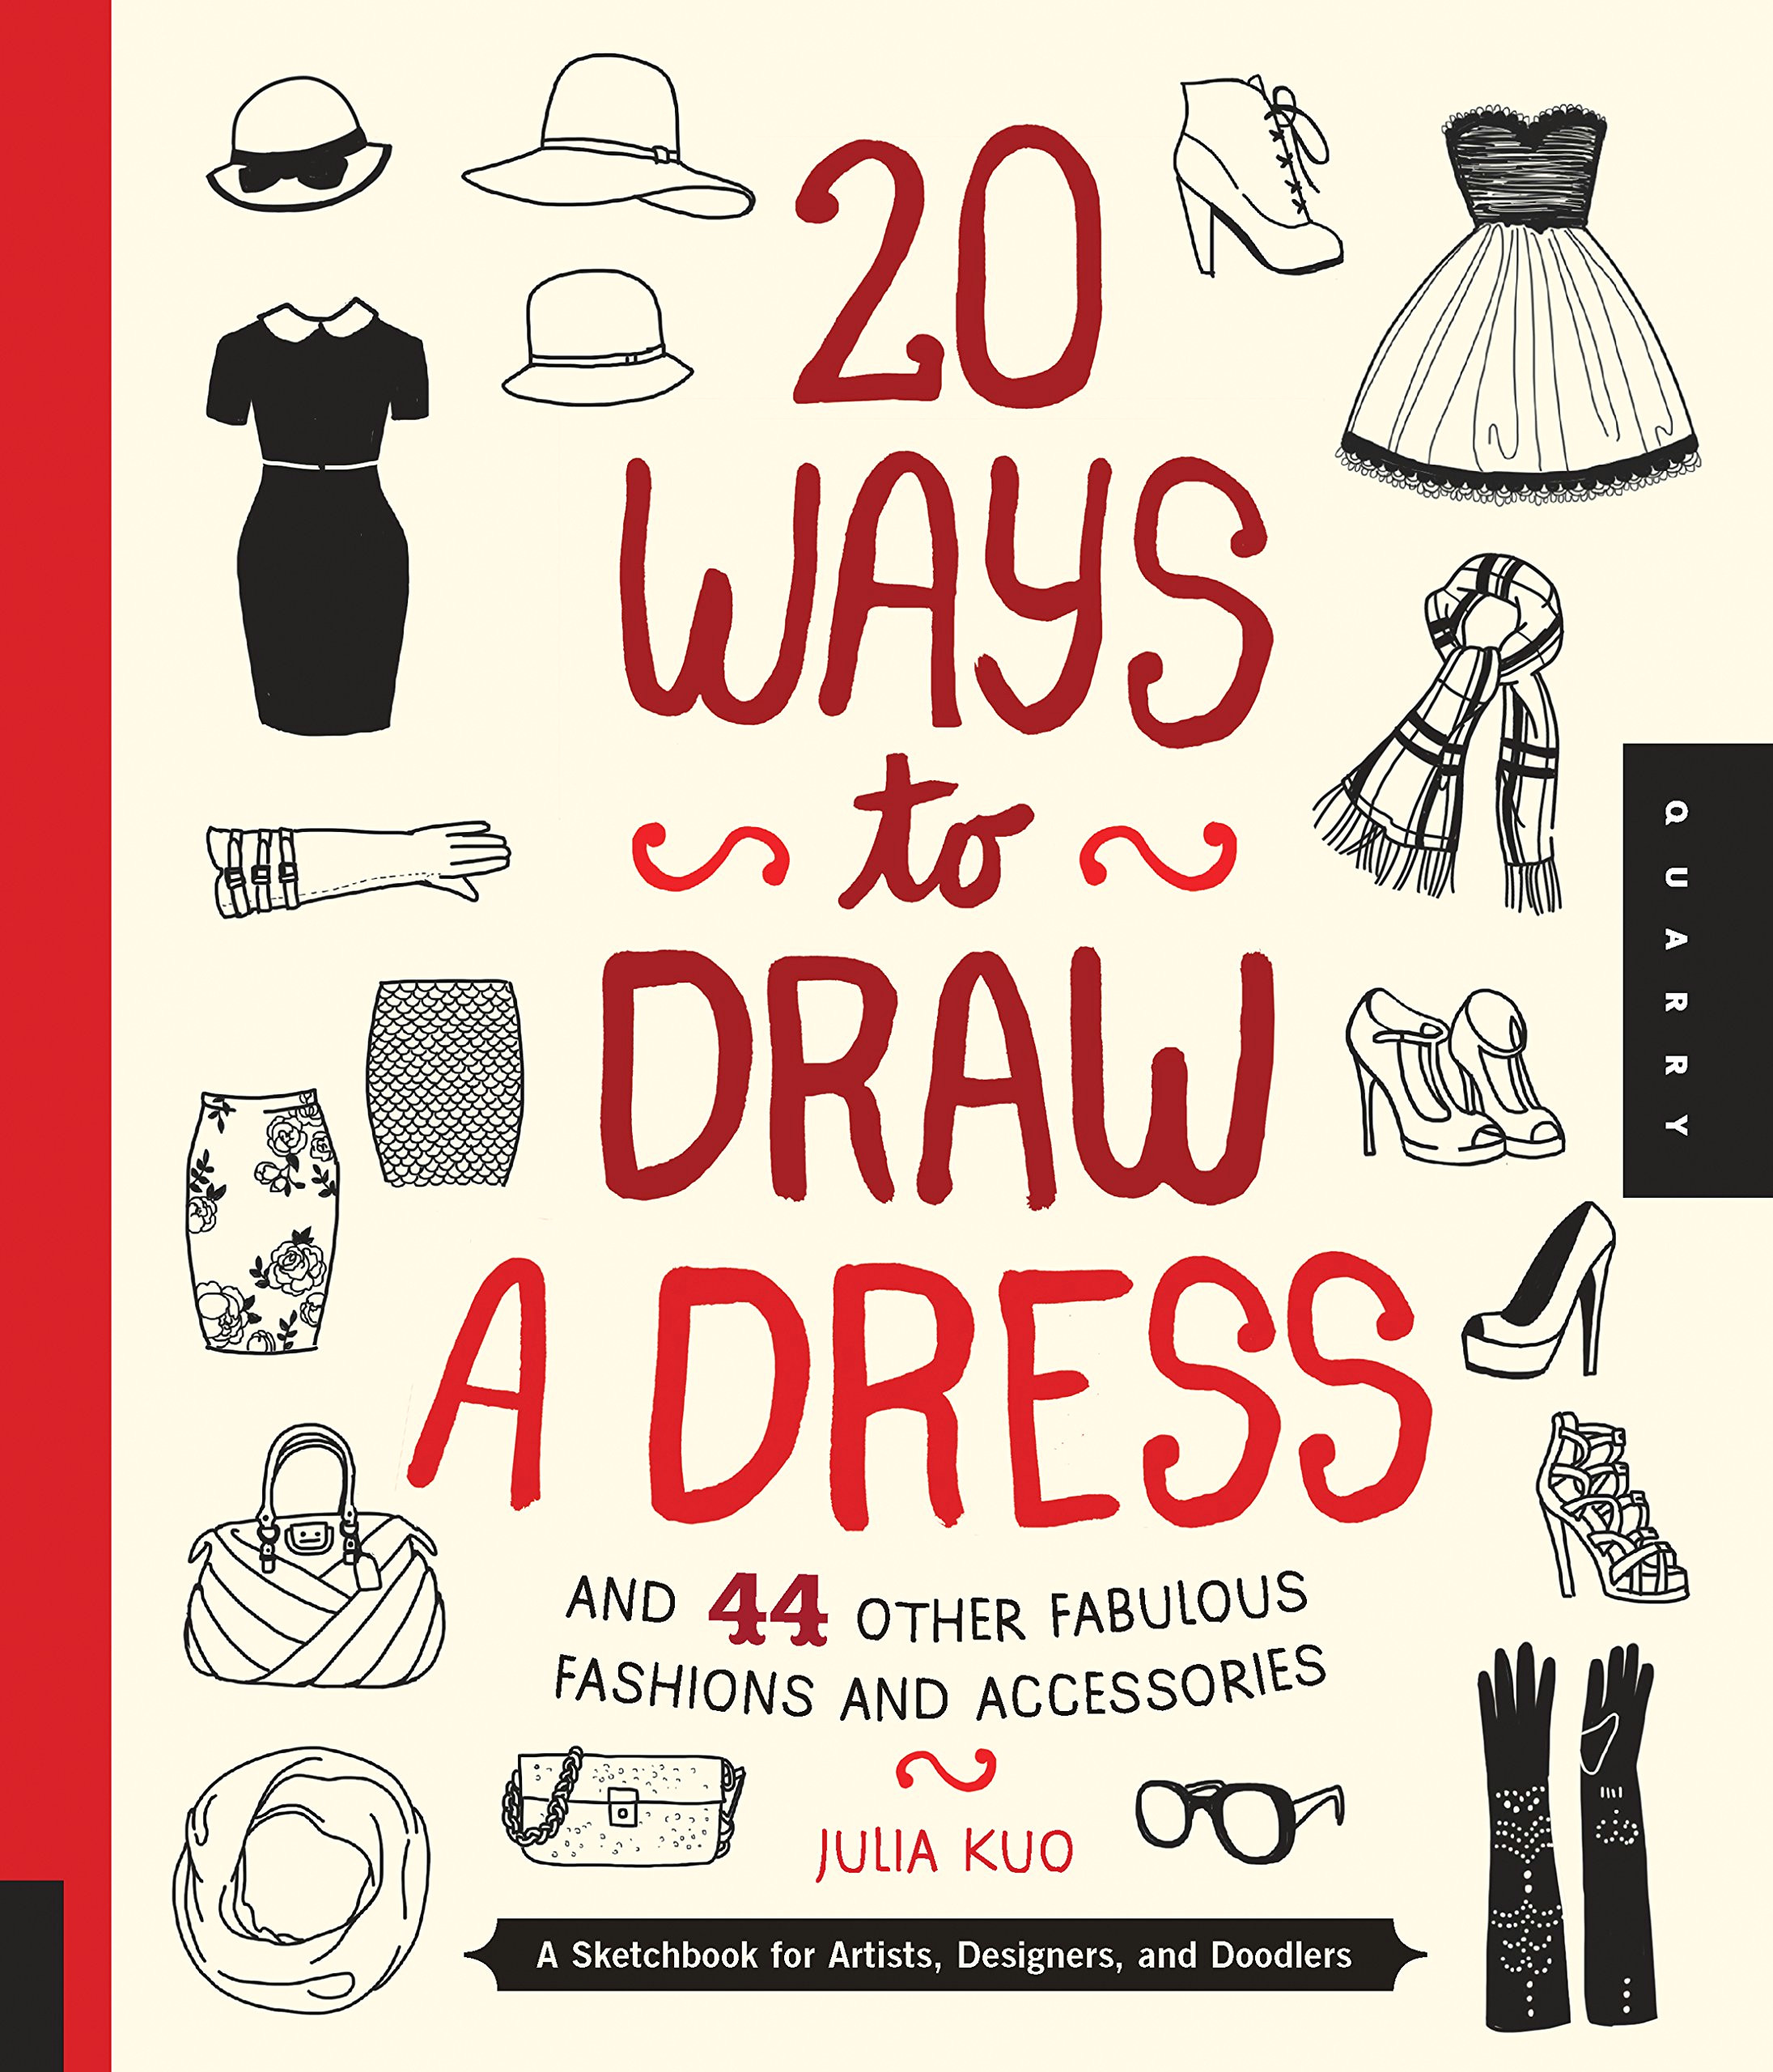 Drawing Ideas for 13 Year Olds Amazon Com 20 Ways to Draw A Dress and 44 Other Fabulous Fashions